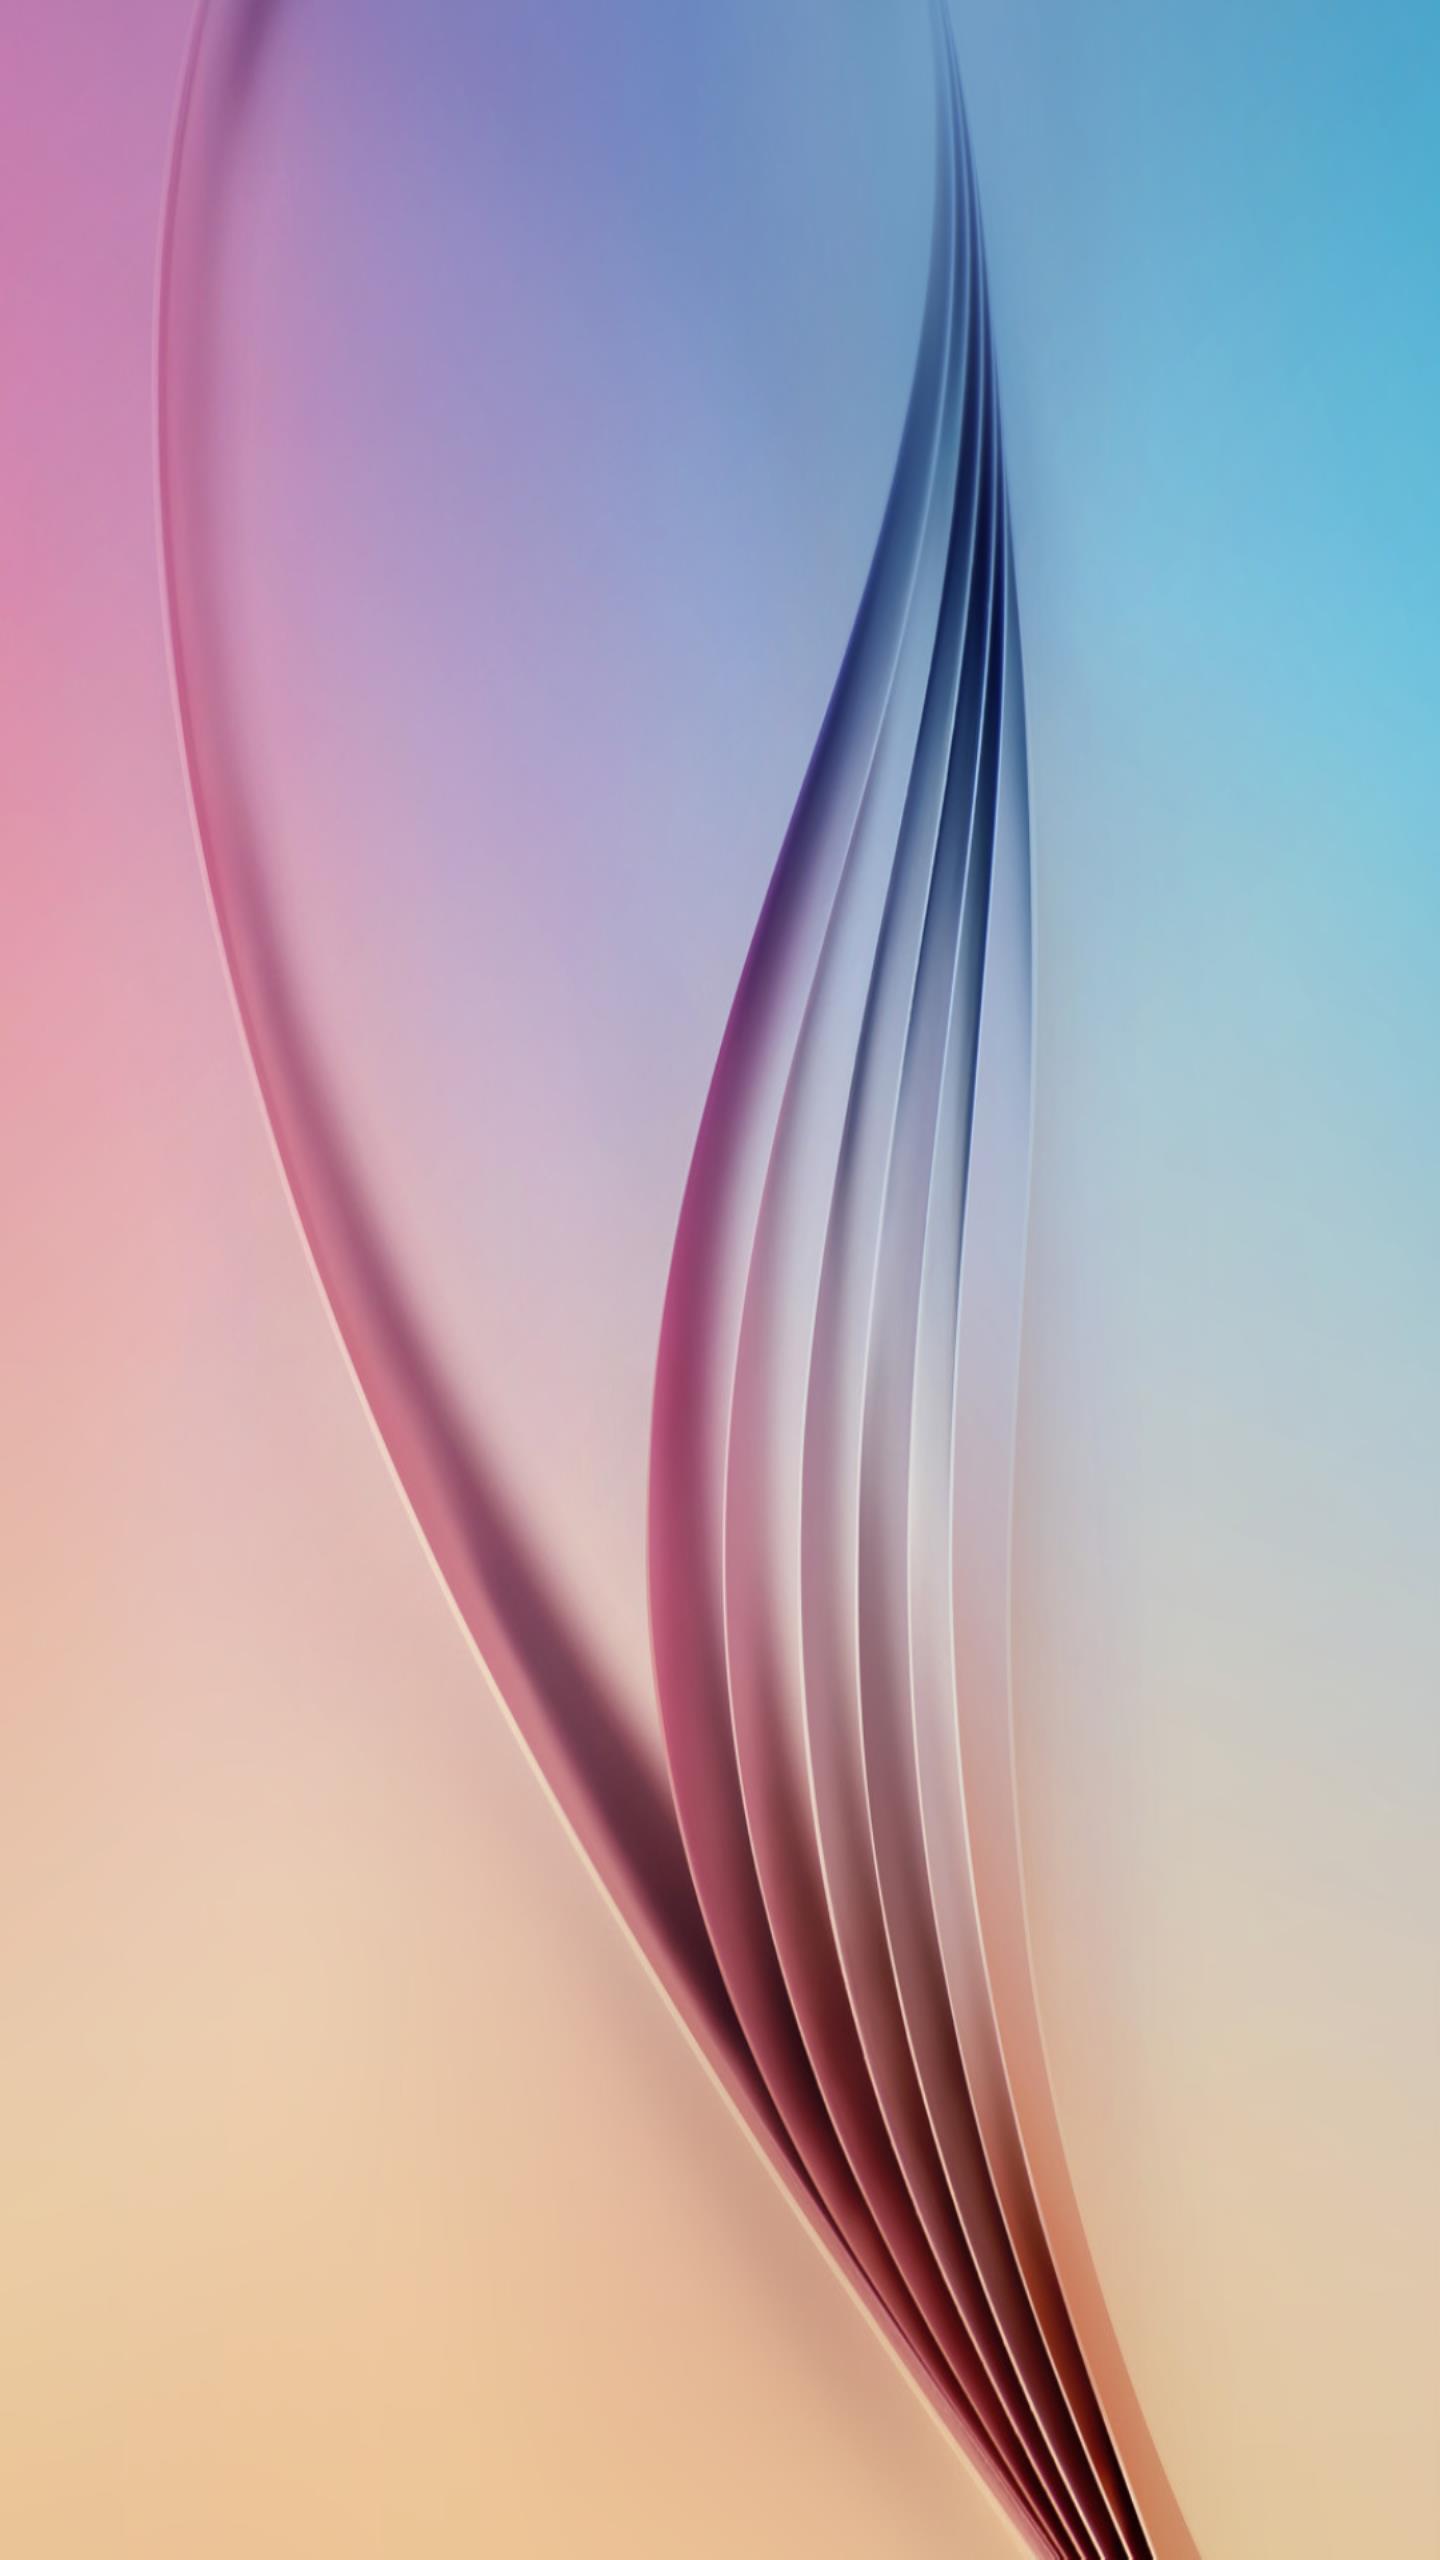 42 Wallpapers For Galaxy S6 On Wallpapersafari